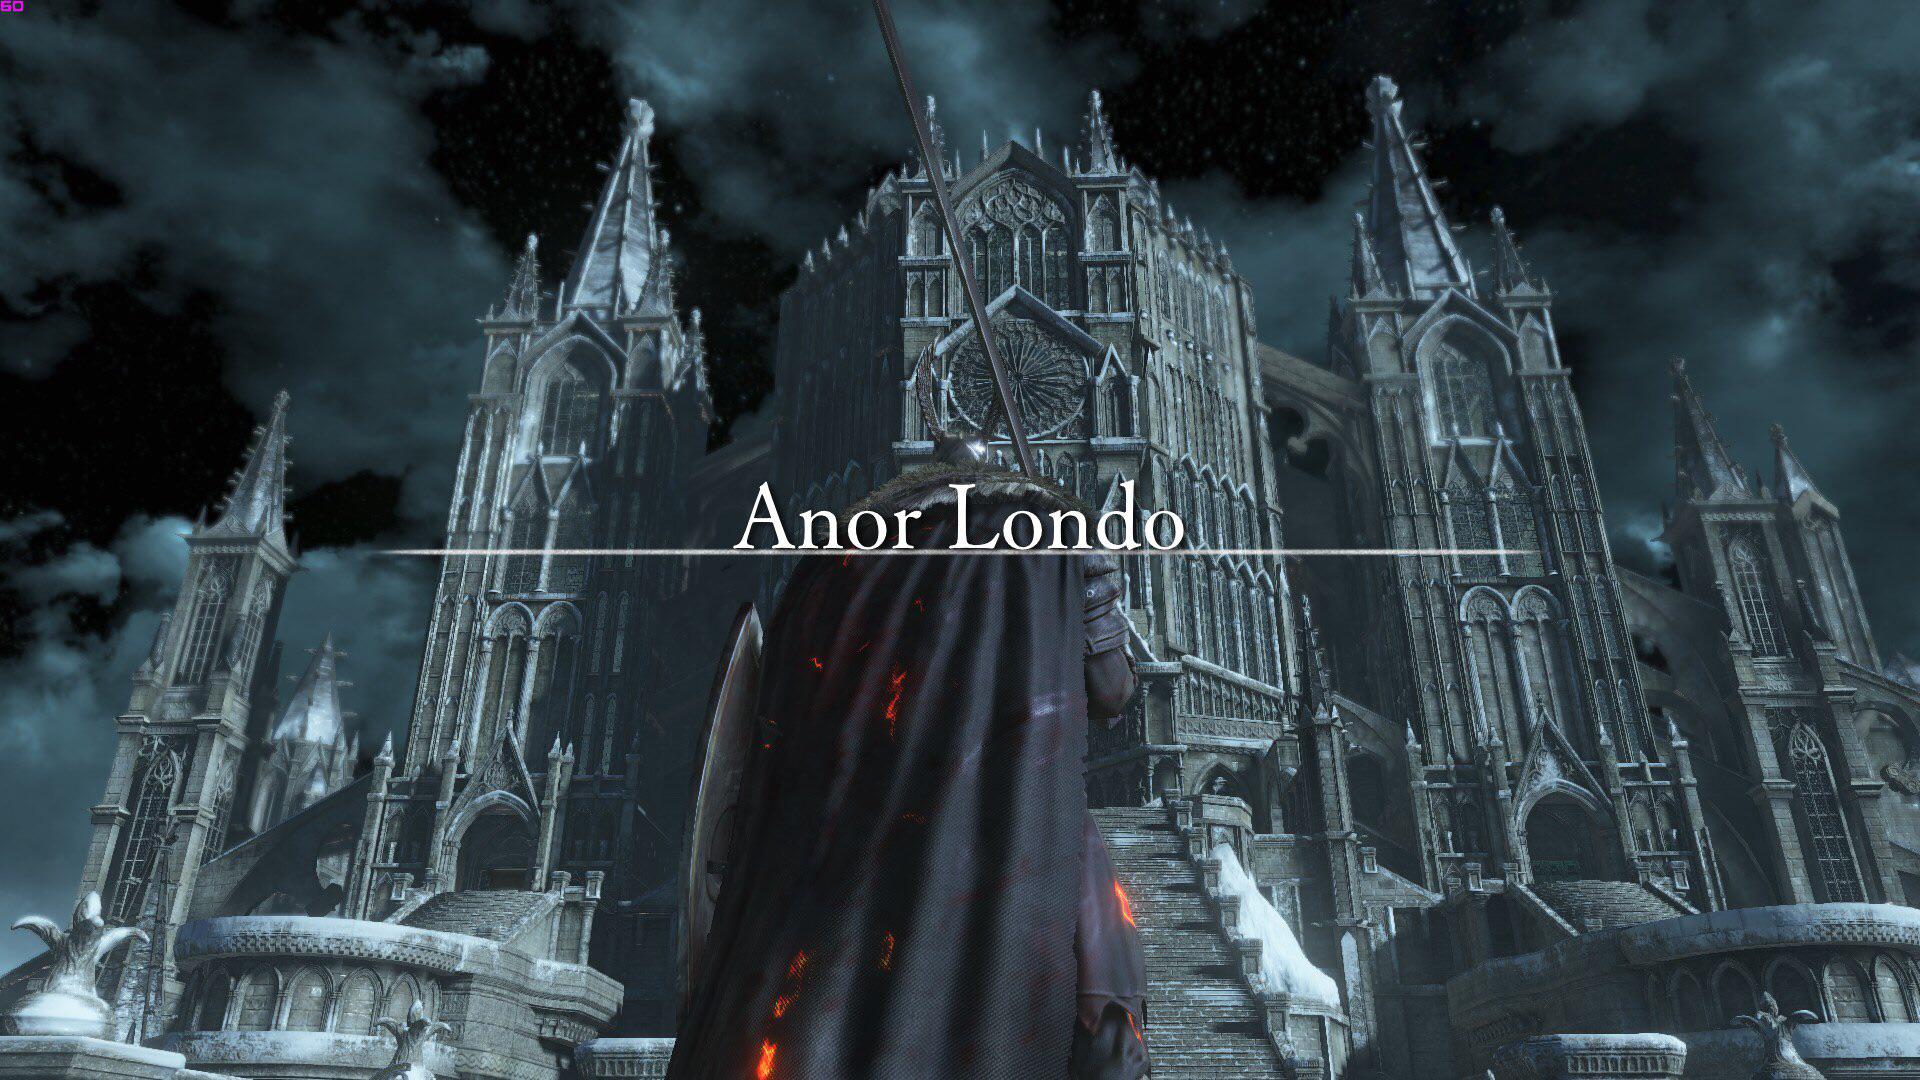 Amazing to see how Anor Londo has changed from Dark Souls 1 to Dark Souls 3. Really puts into perspective how Sulyvan and Aldrich have ruined everything